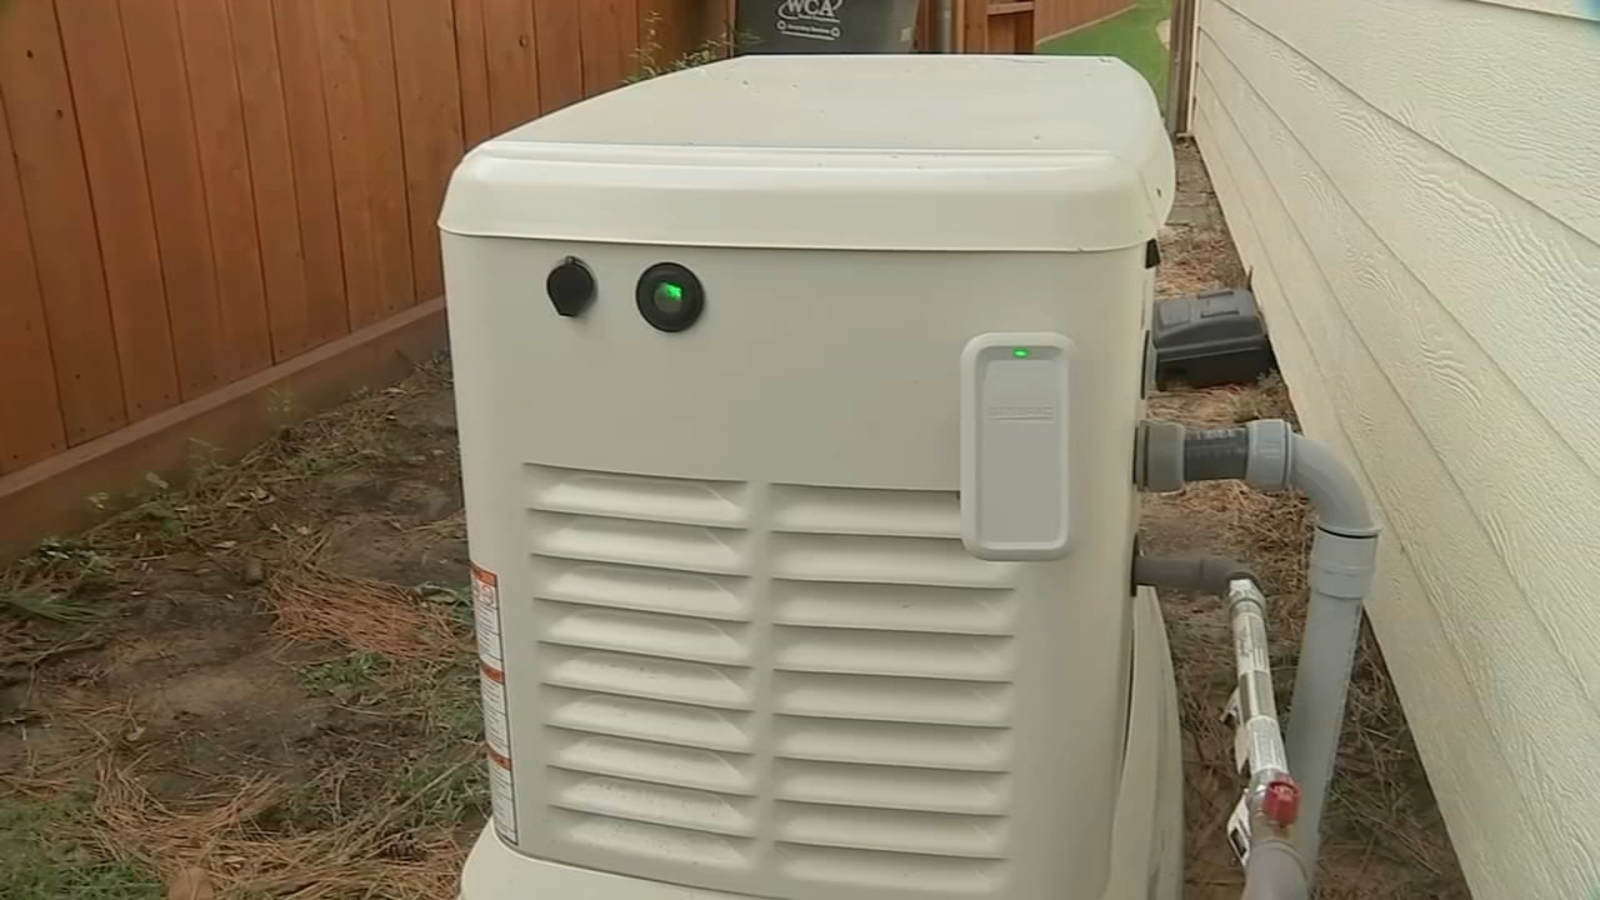 Hurricane Beryl aftermath: Many warn about dangers of poorly installed generators which can lead to carbon monoxide poisoning [Video]